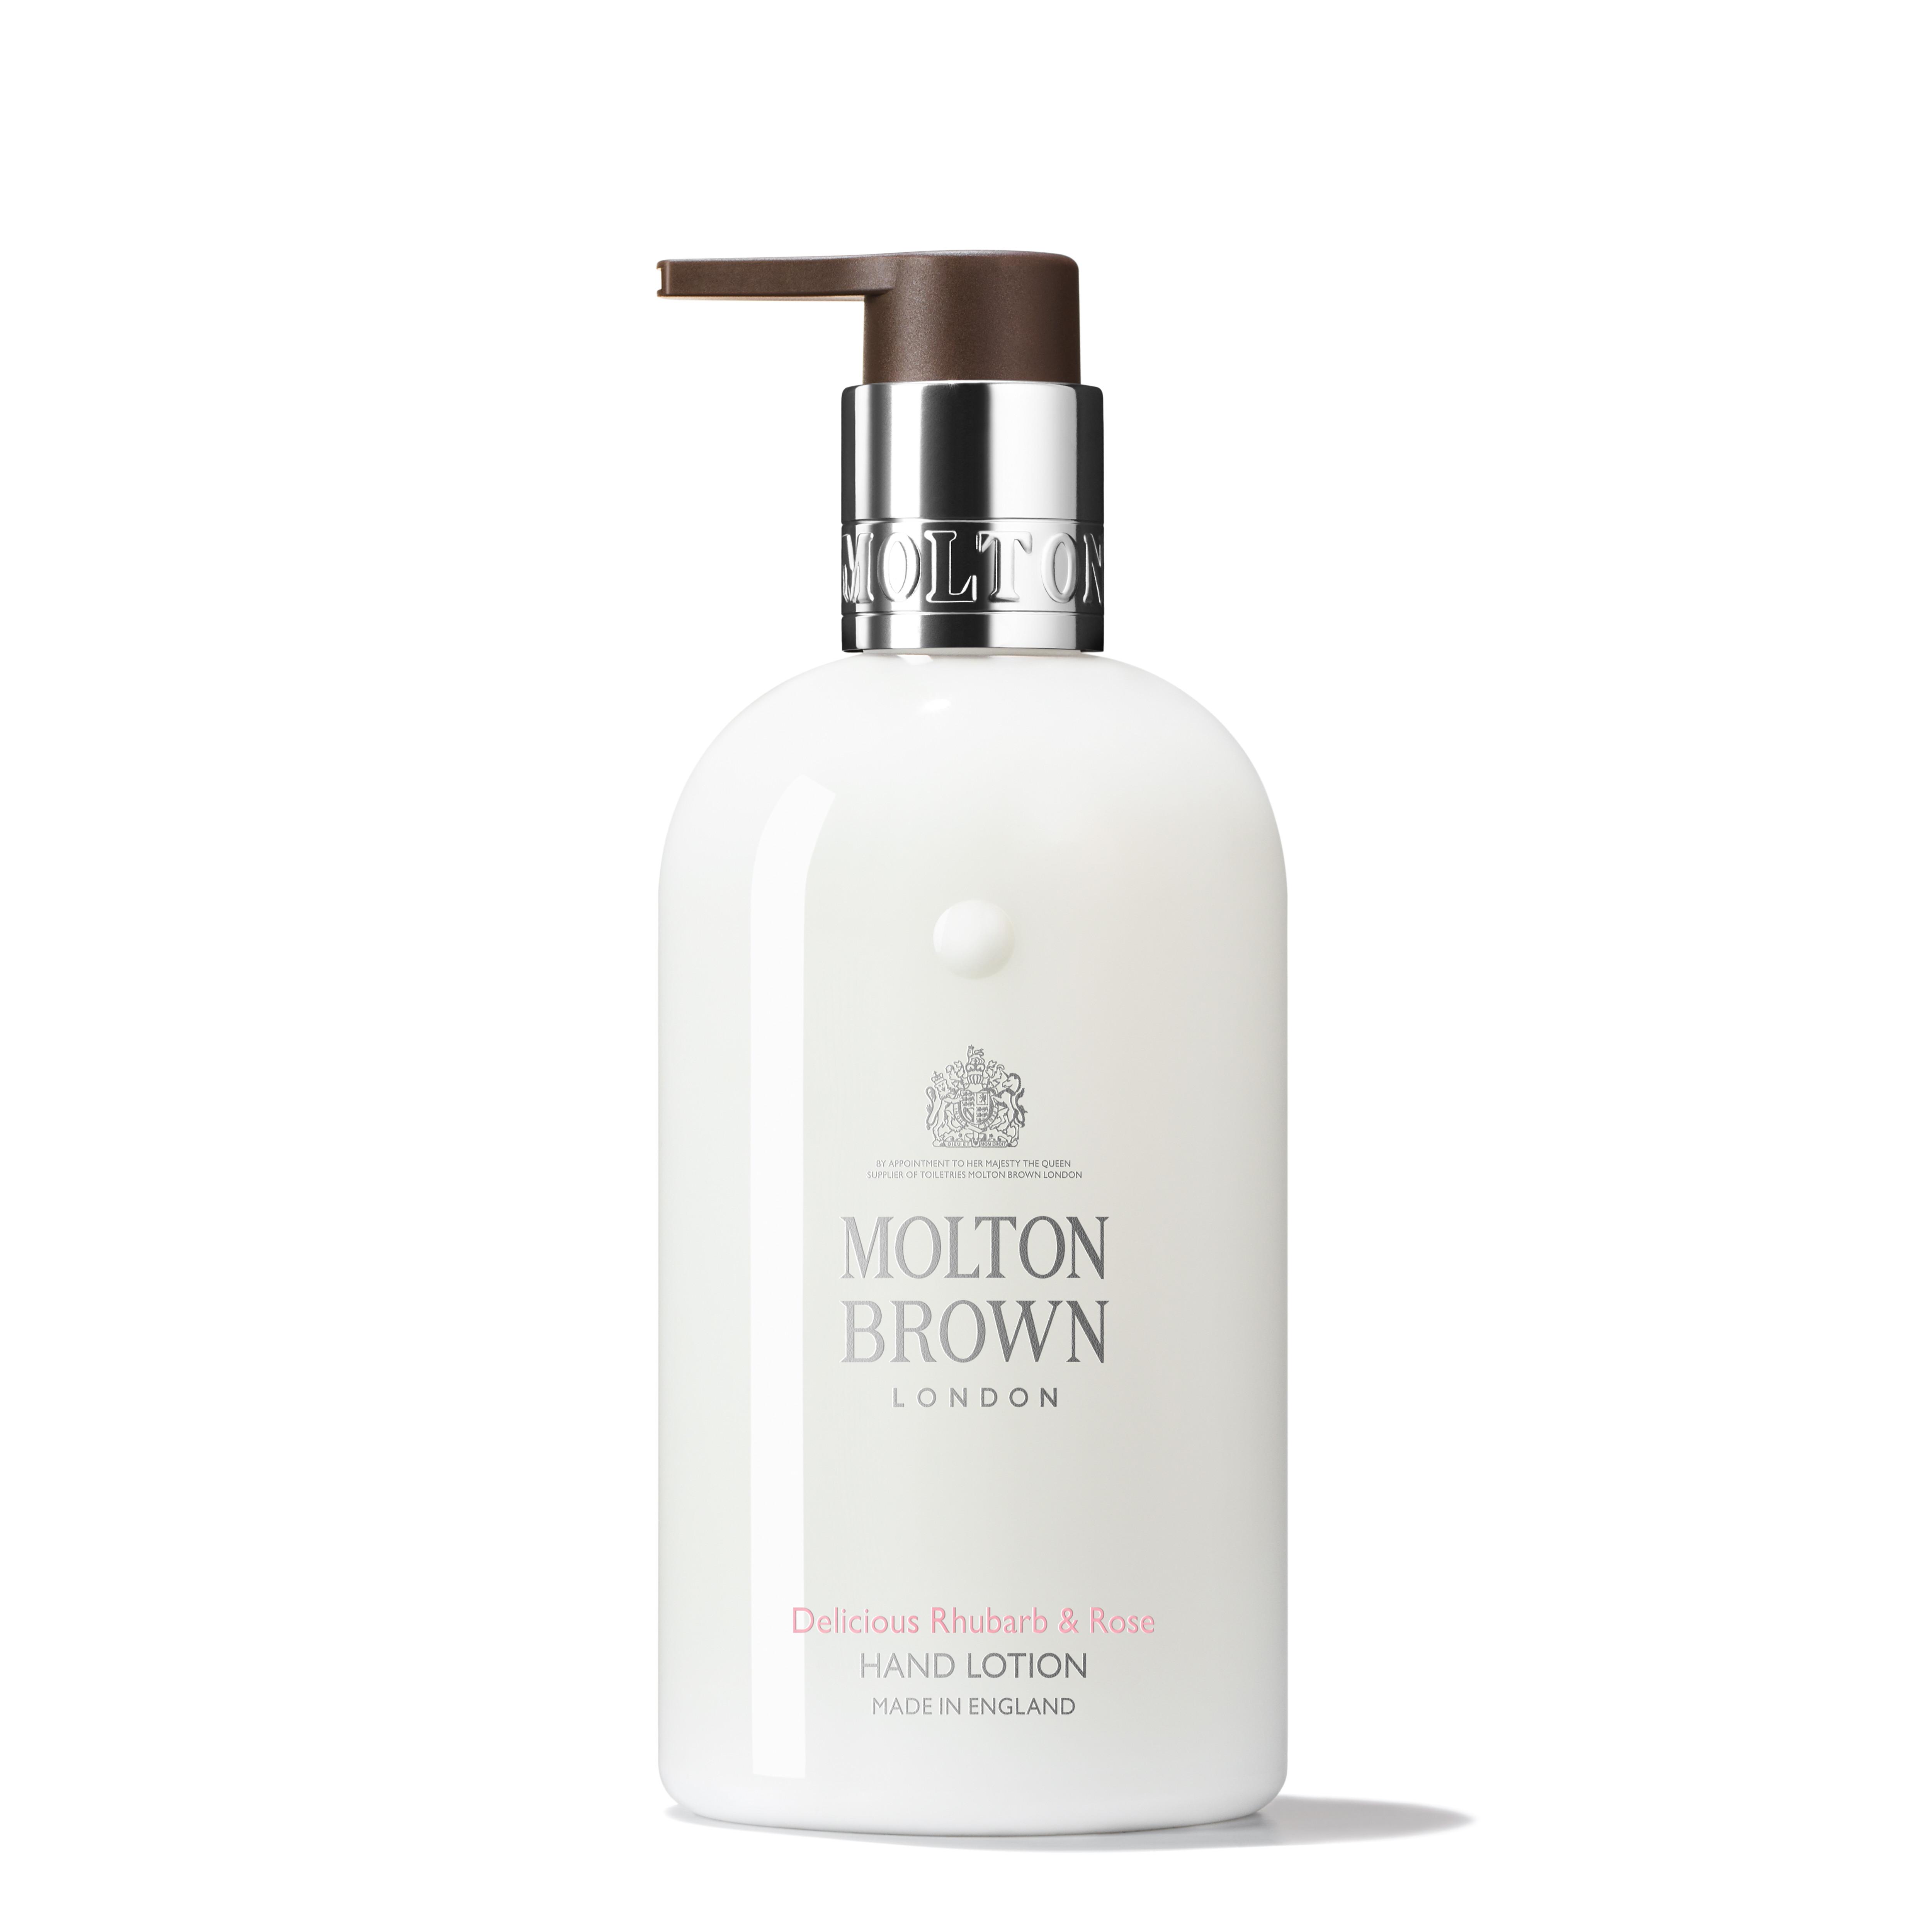 Molton Brown Delicious Rhubarb & Rose Hand Lotion - 300ml